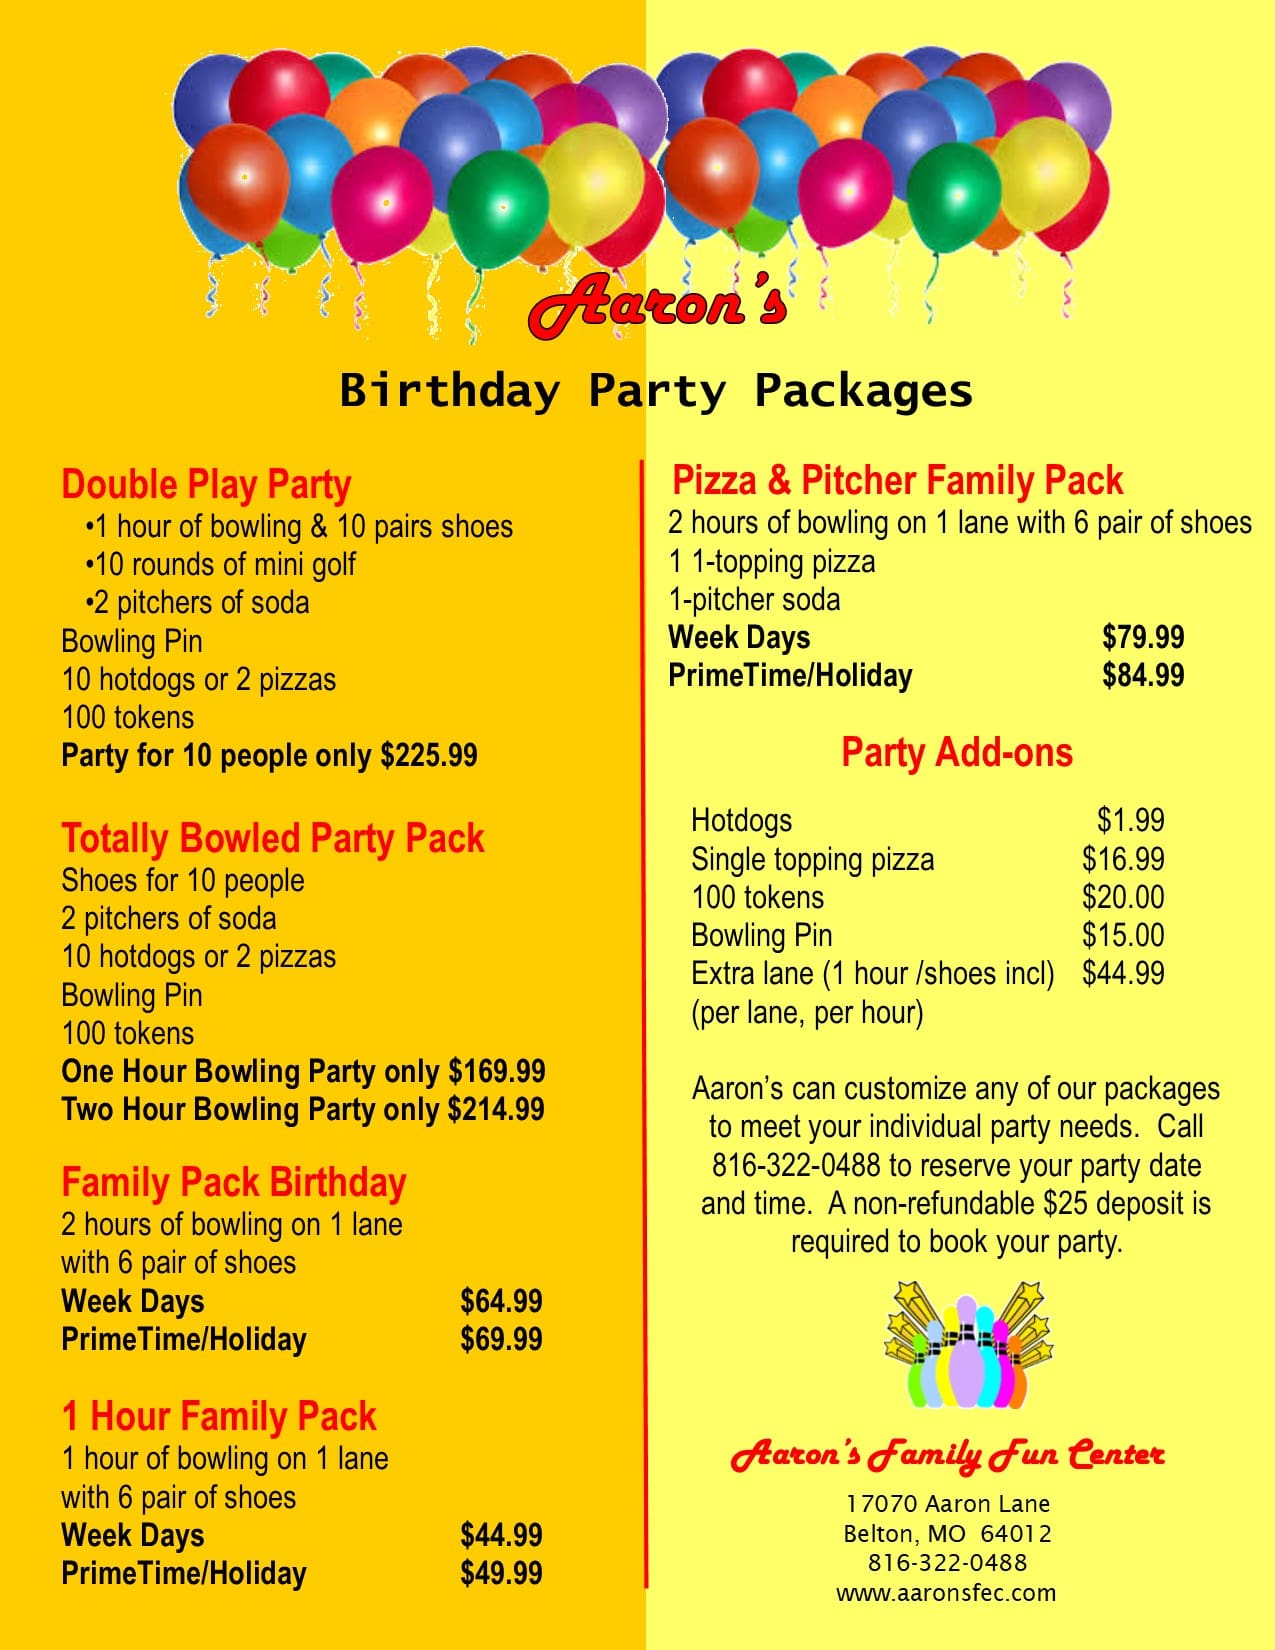 Cost-effective party packages